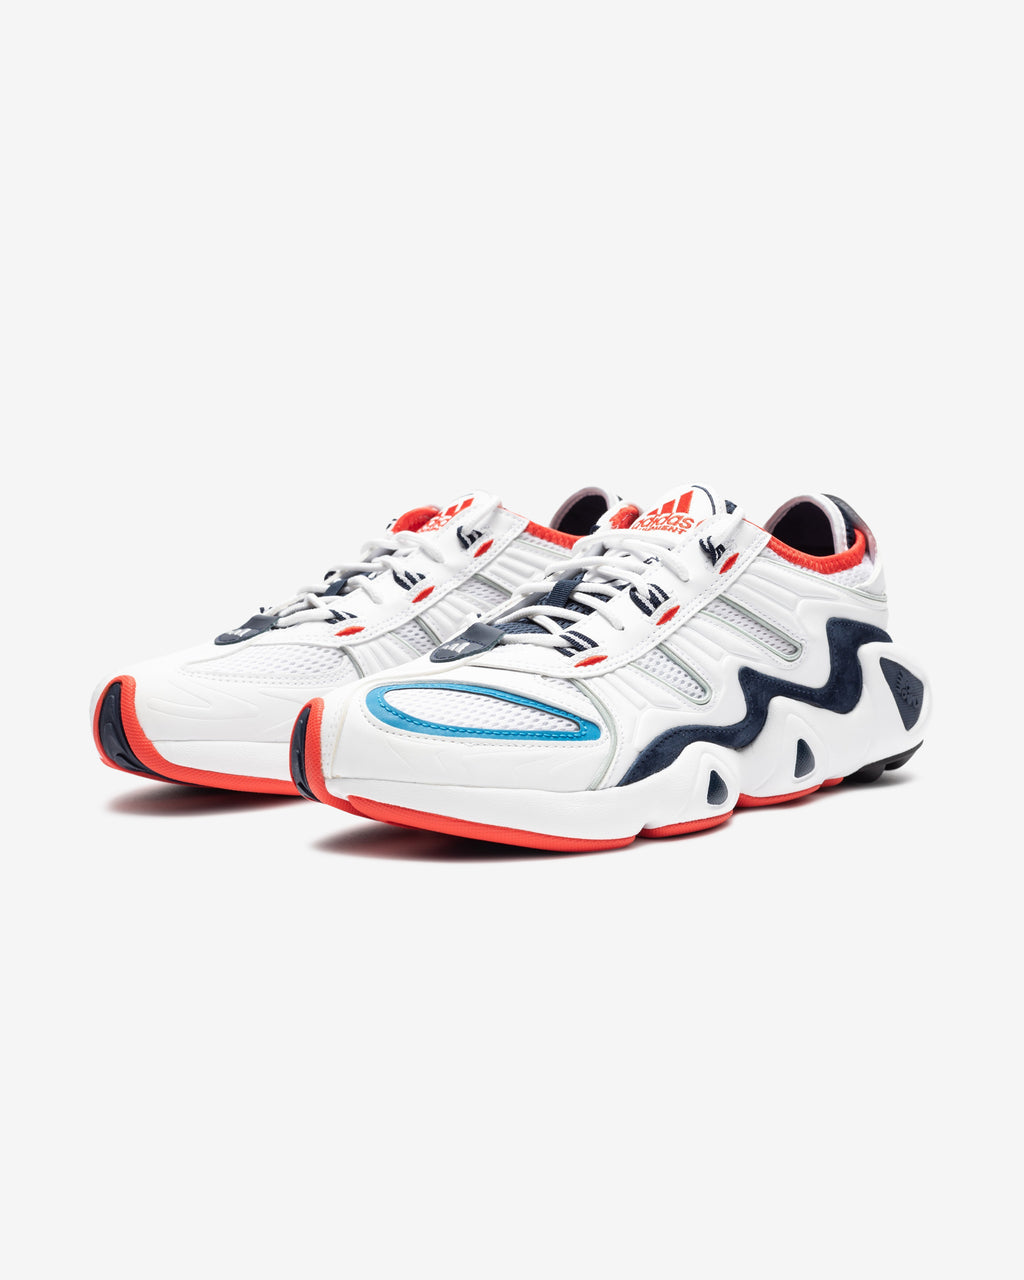 FYW S-97 - FTWWHT/SUPCOL/RED